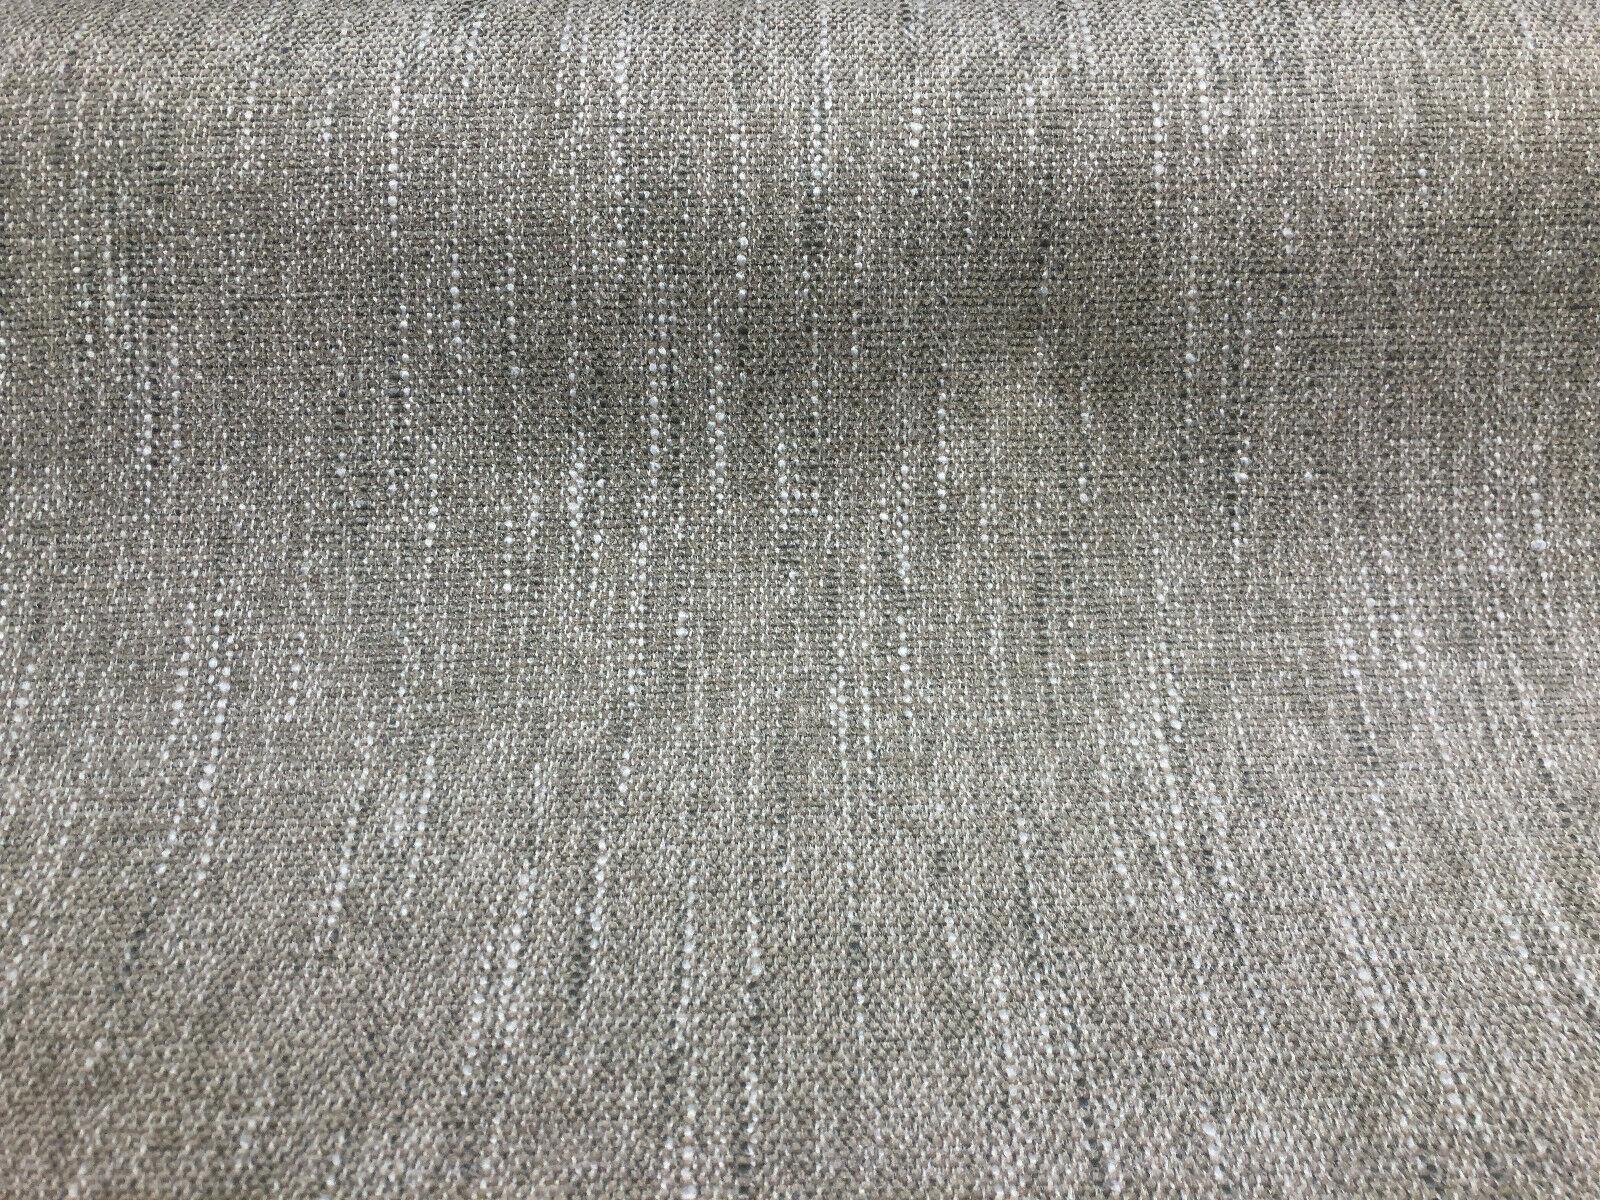 Avenger Driftwood Tweed Soft Chenille Upholstery Fabric by the yard ...